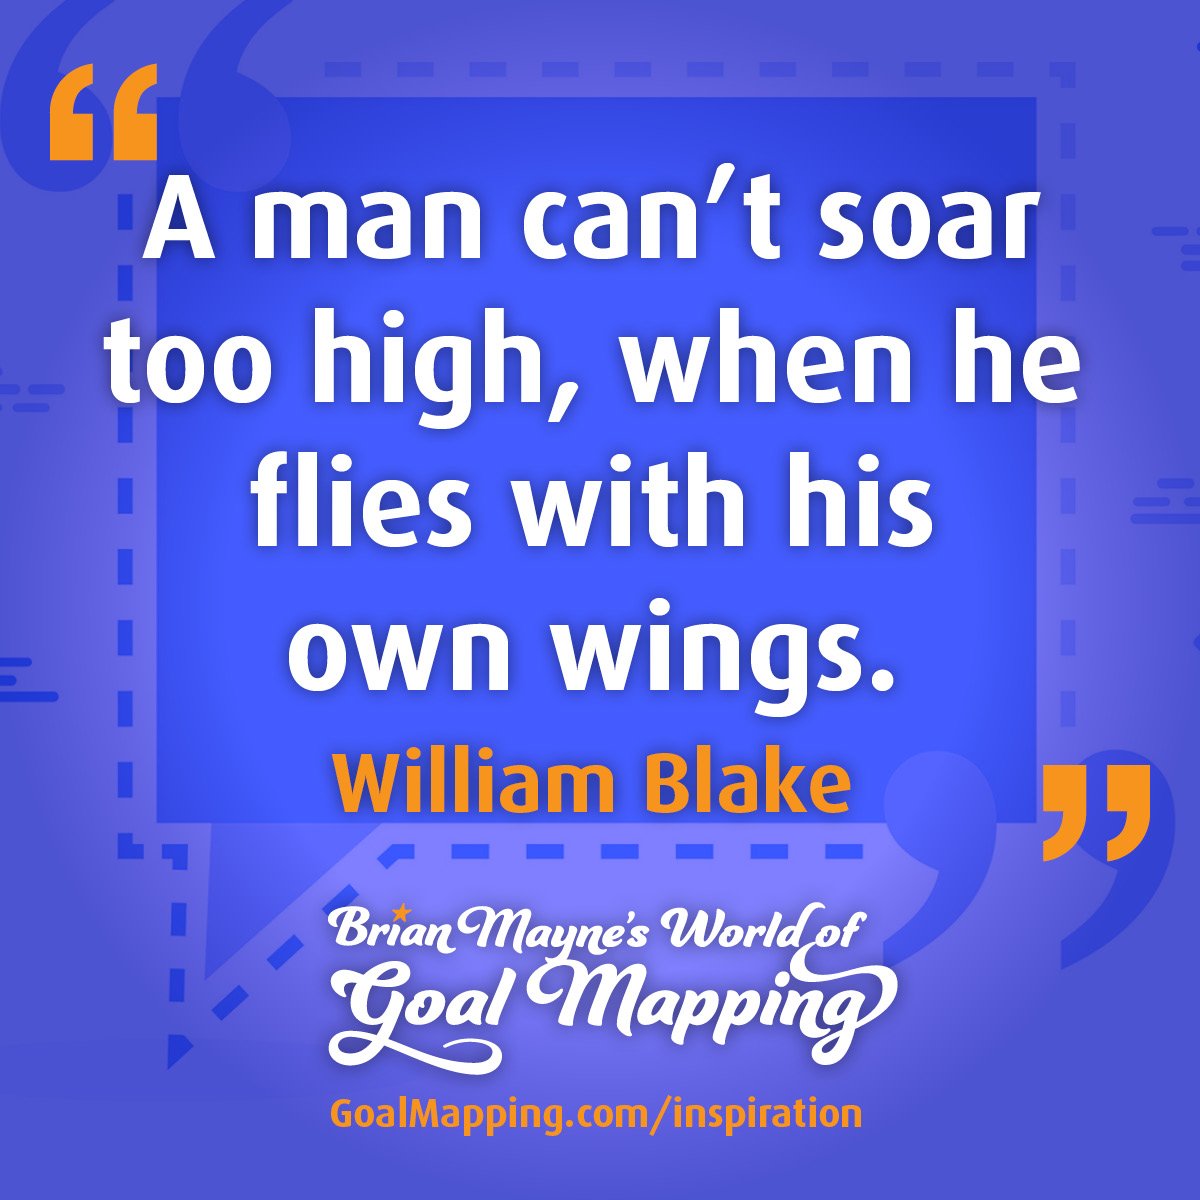 "A man can’t soar too high, when he flies with his own wings." William Blake